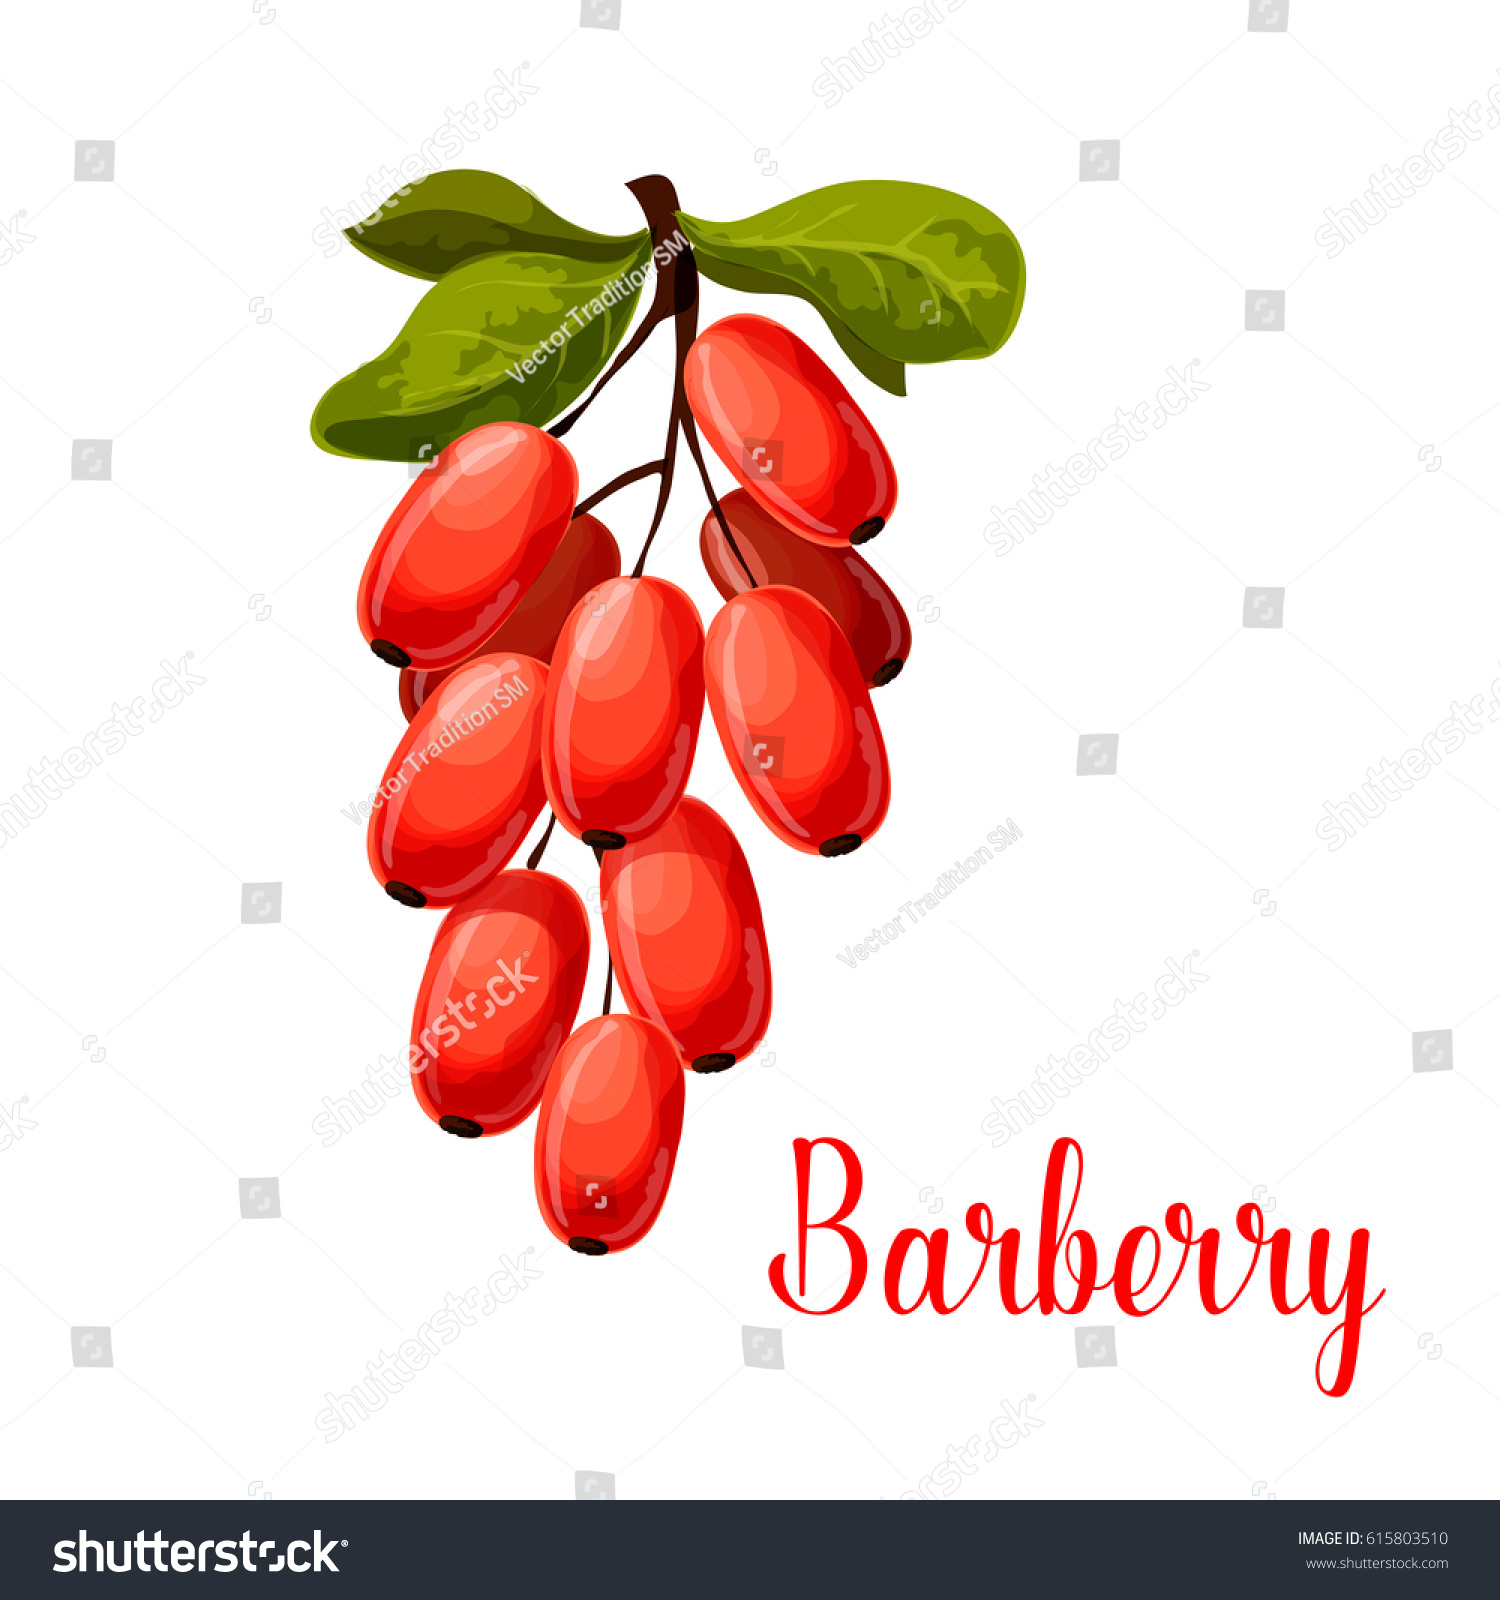 Barberry fruit branch isolated cartoon symbol. Fresh red berry of barberry with green leaves for natural healthy spice and condiments, vegetarian food, asian cuisine themes design #615803510